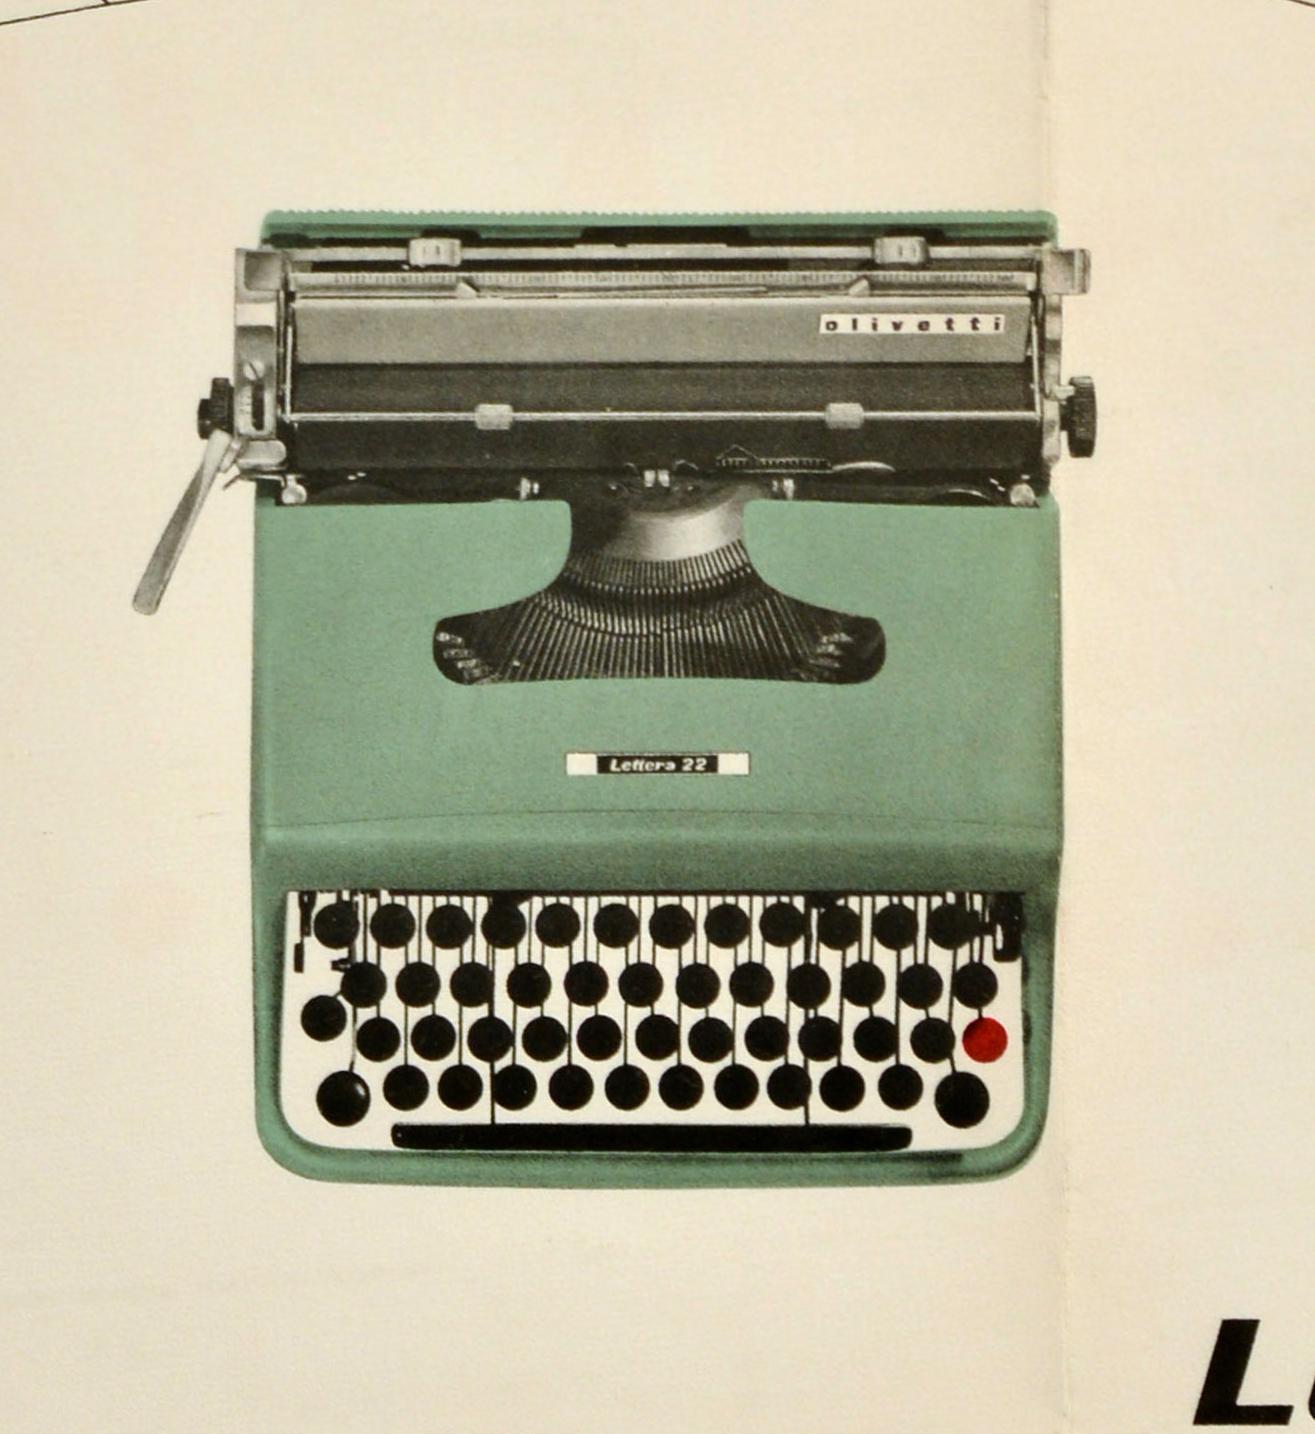 Original vintage advertising poster for the Olivetti Lettera 22 typewriter model featuring a great mid-century graphic design depicting colourful lines, arches and dots above a photograph of a new Olivetti typewriter with the stylised title text